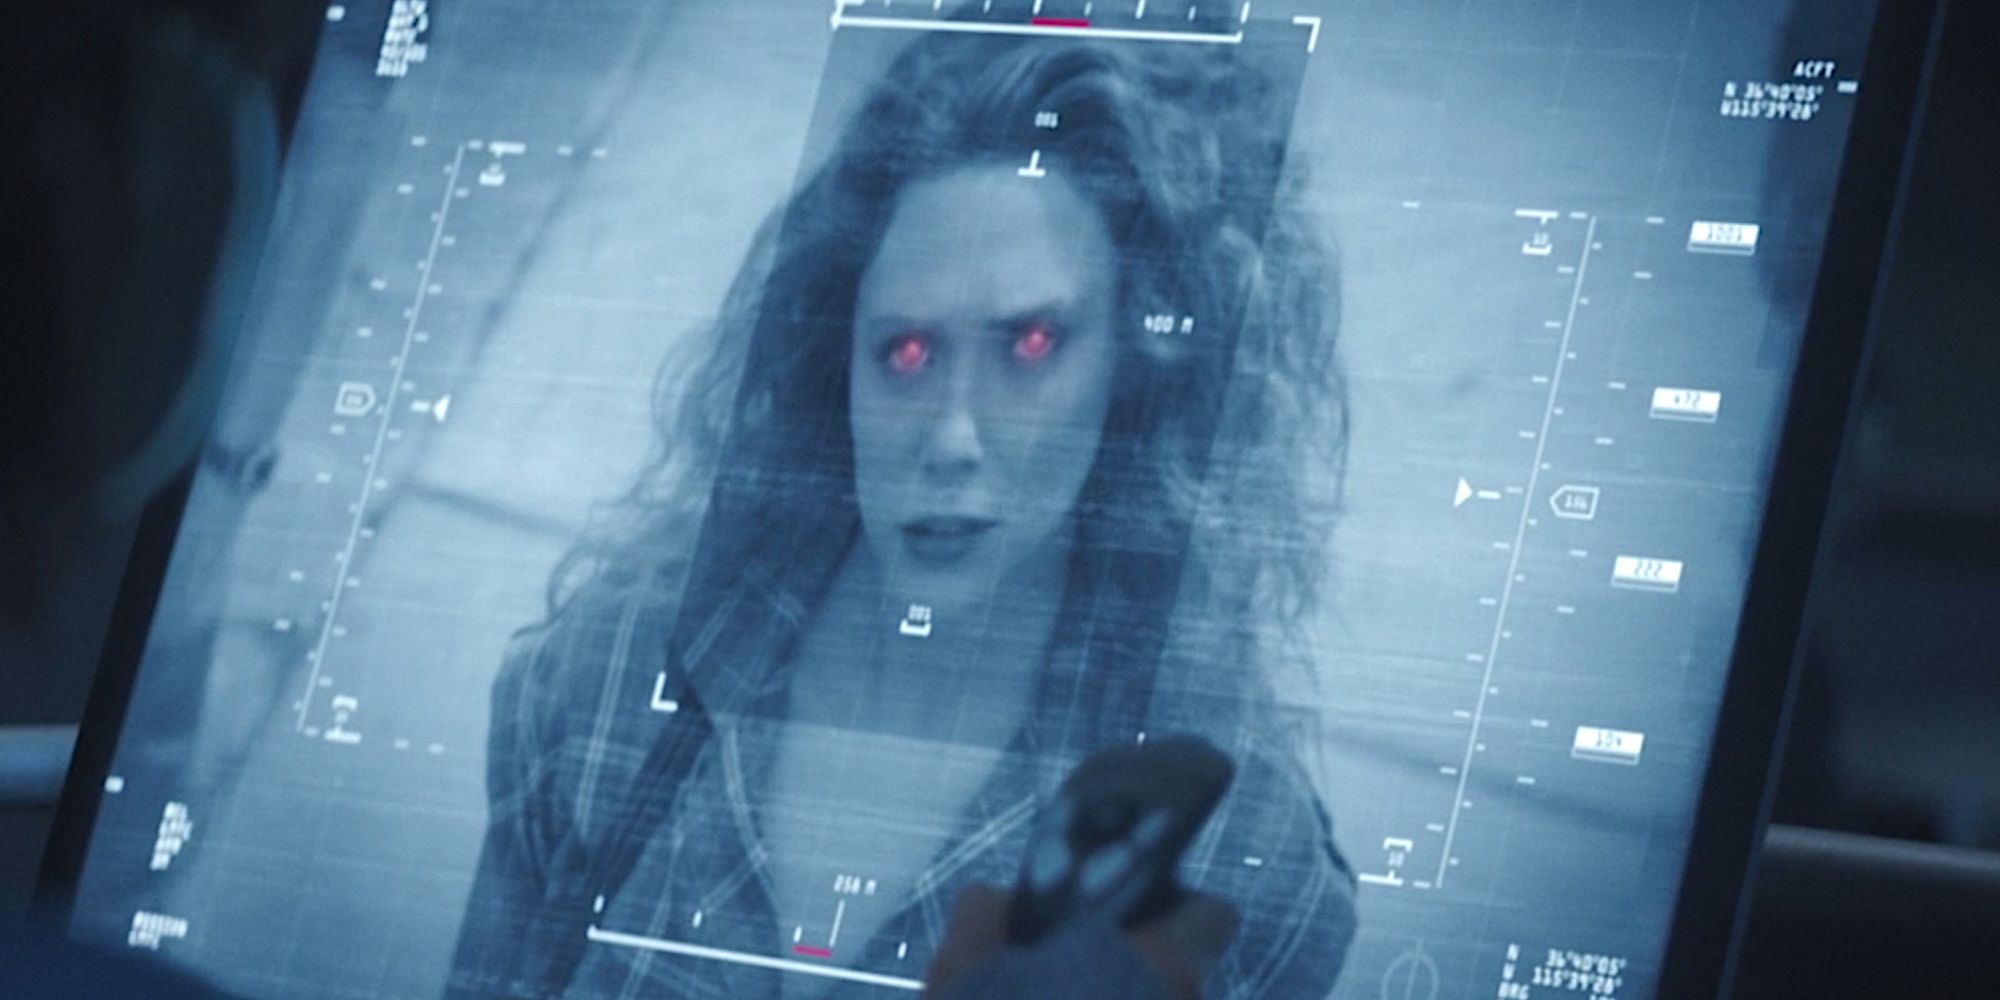 Wanda being viewed through a black-and white military display, as she stares directly into the camera, with glowing red eyes